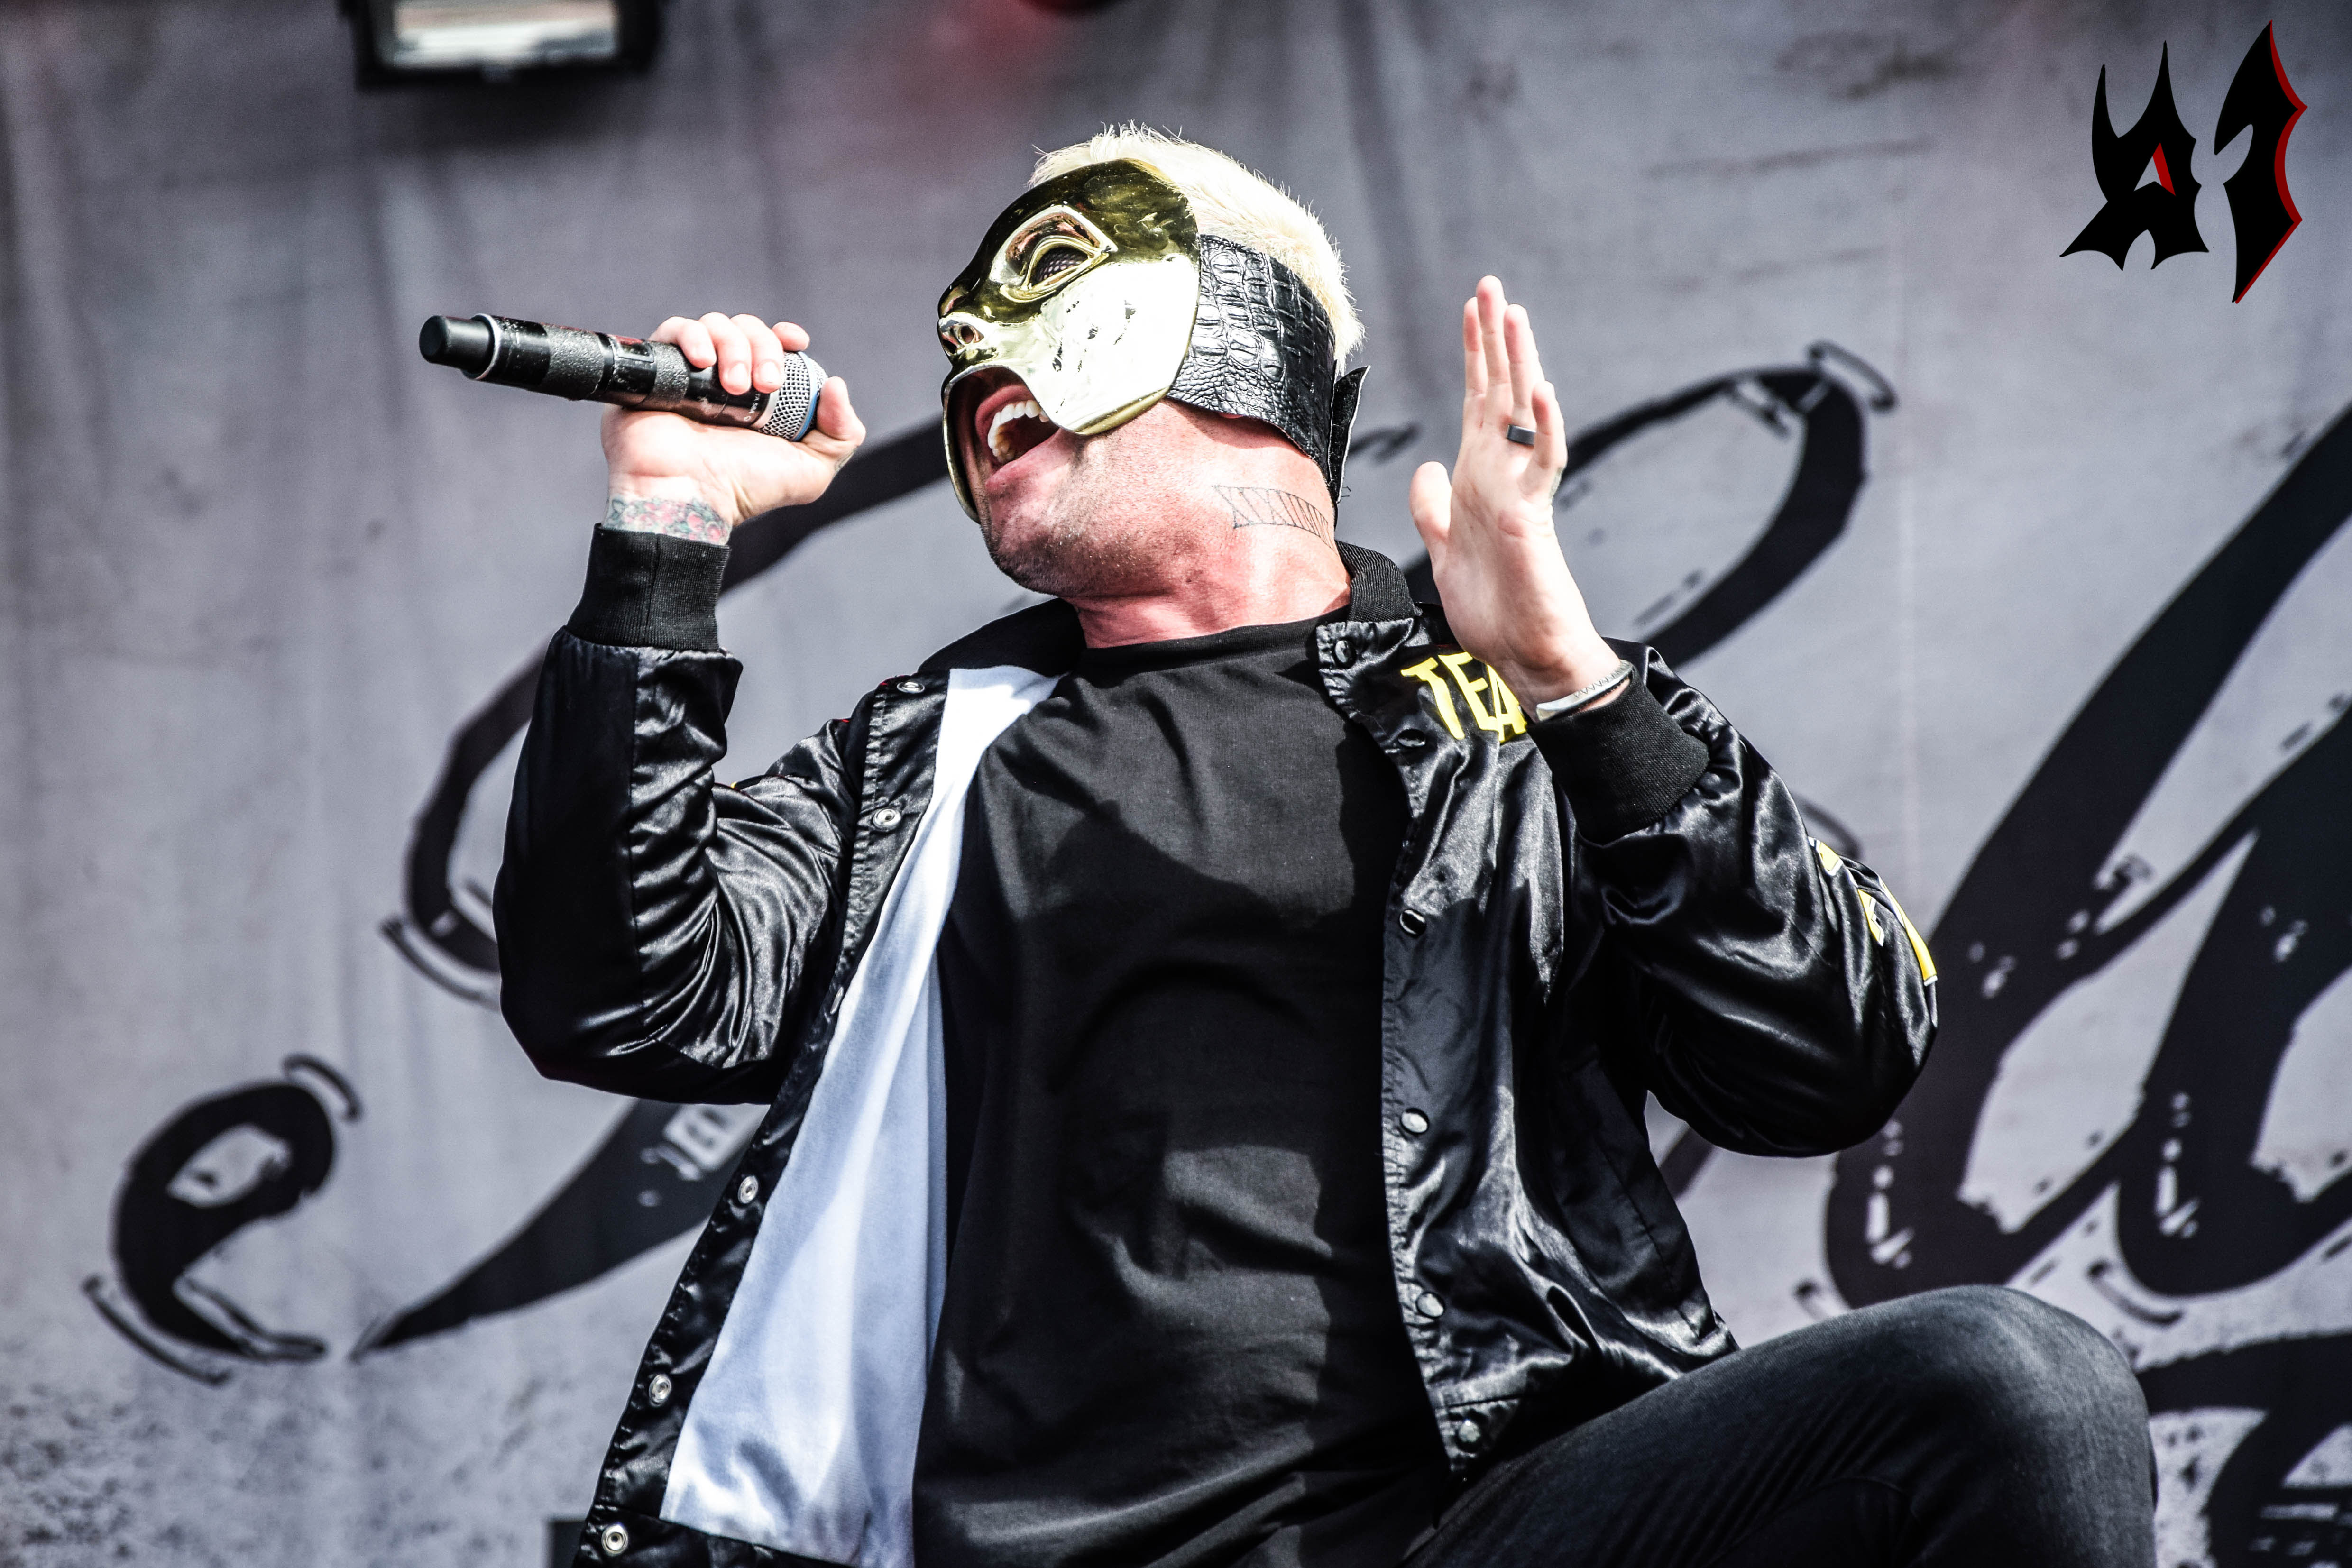 Donwload 2018 – Day 2 - Hollywood Undead 19